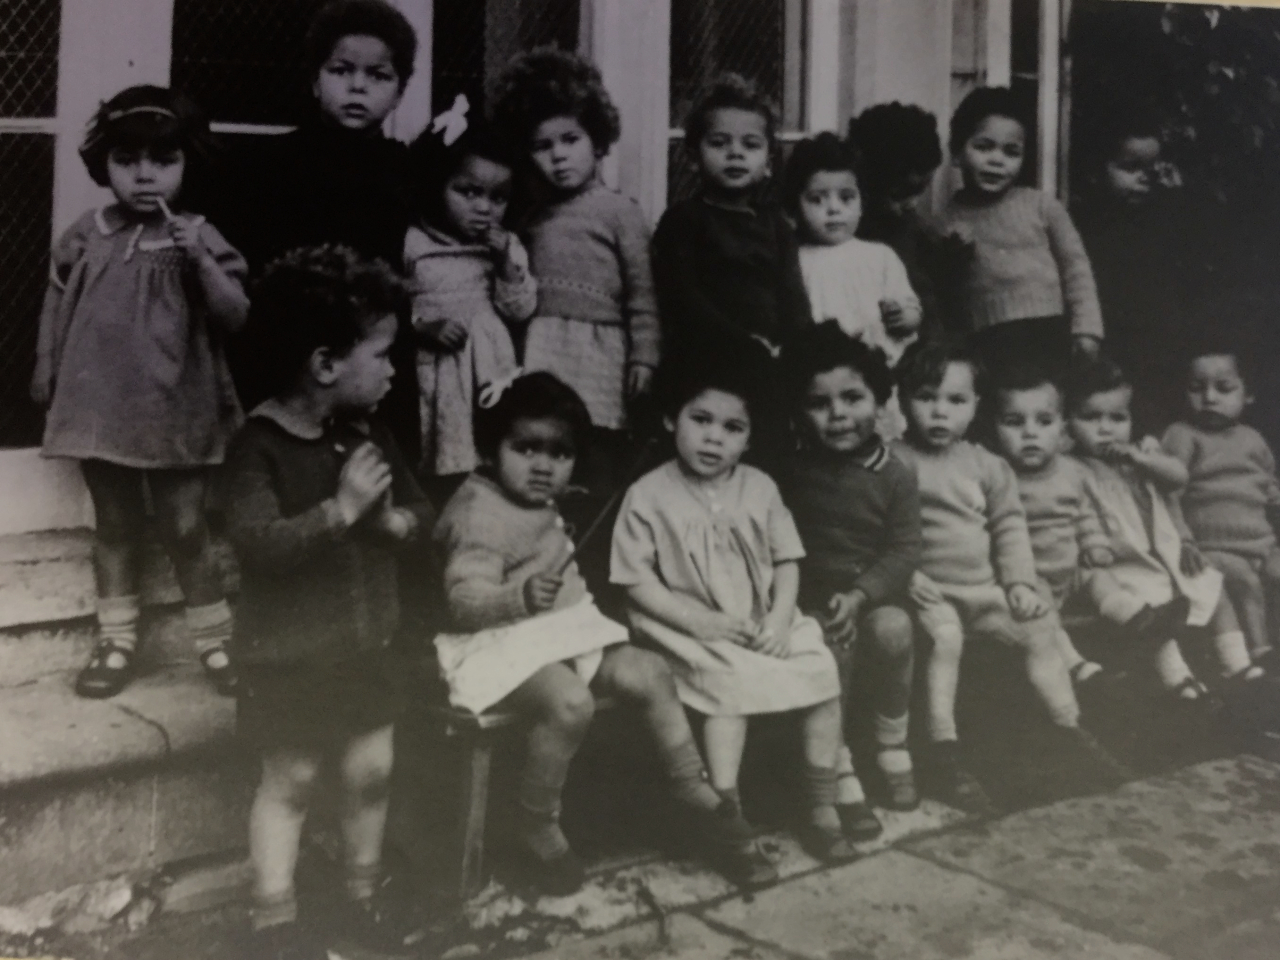 black and white photo of children sitting and standing on steps outside building